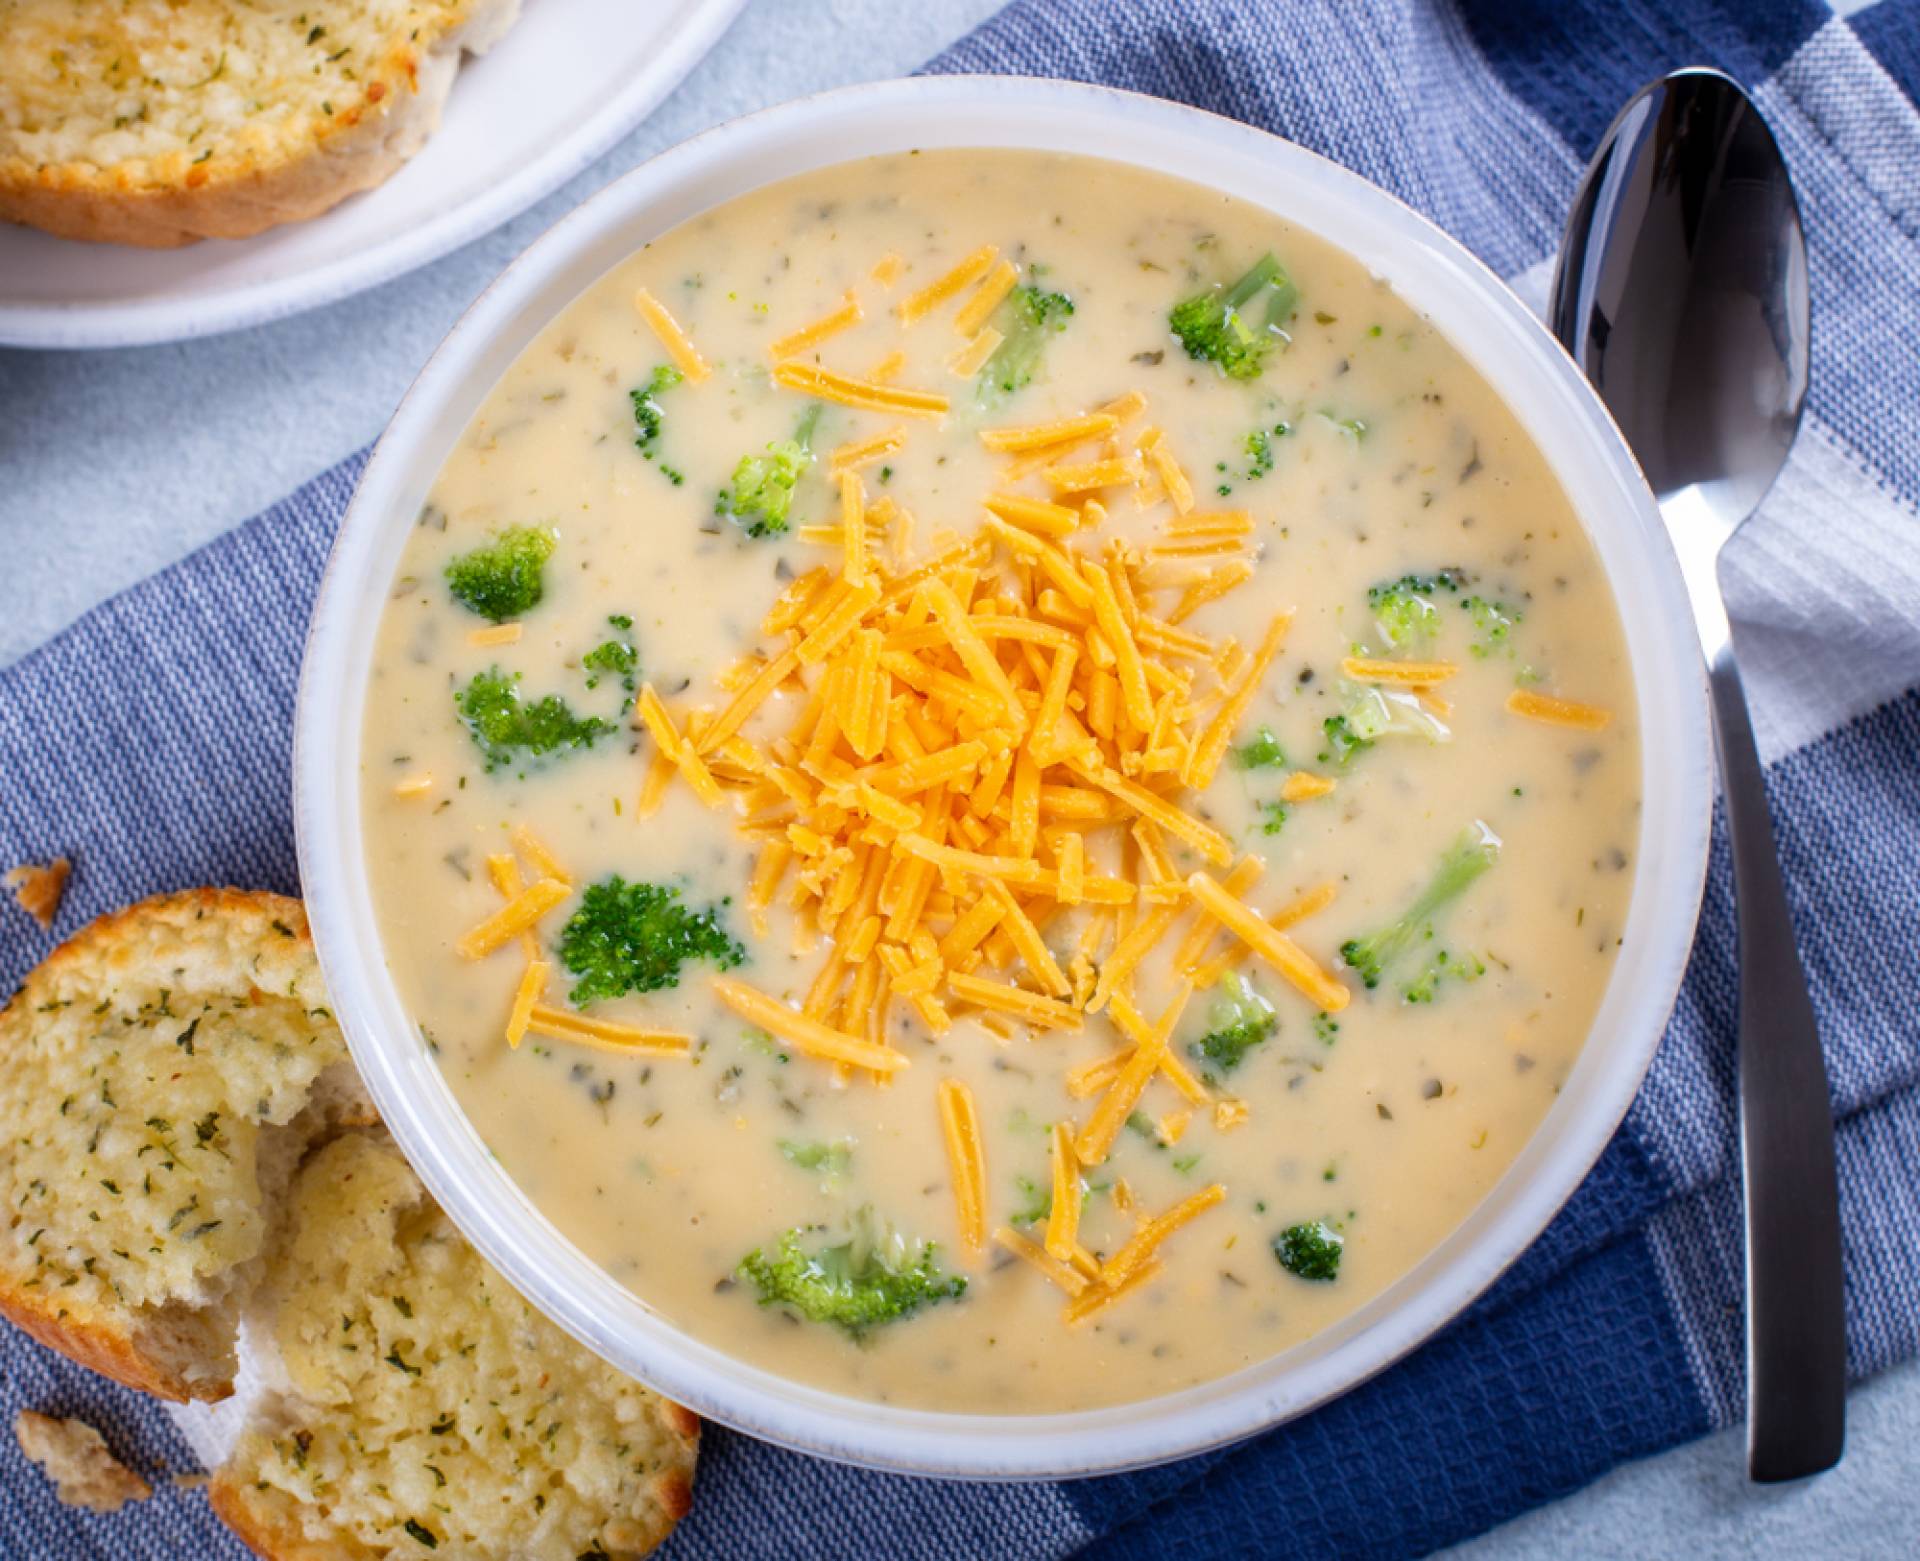 Broccoli Beer Cheese Soup with Warm Pretzel